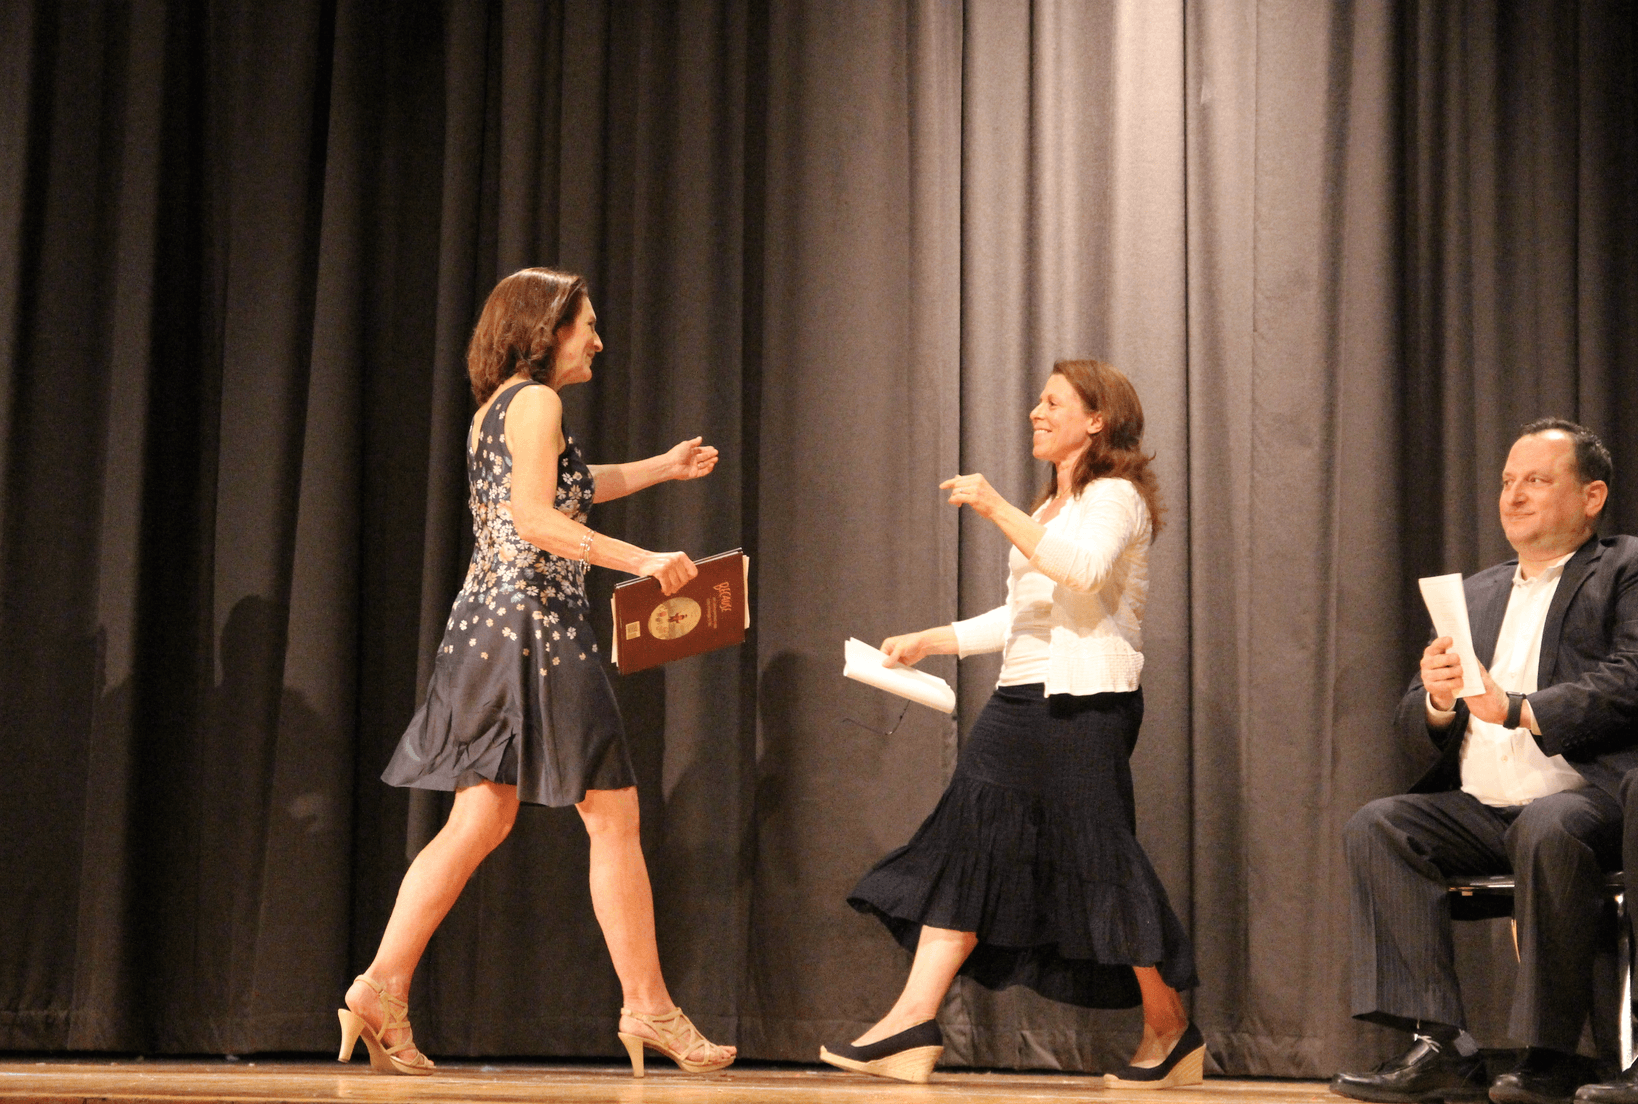 Kate Miserocchi greets her nominator Lisa Small at the Distinguished Teacher Awards Ceremony. May 7, 2019 Photo: Leslie Yager